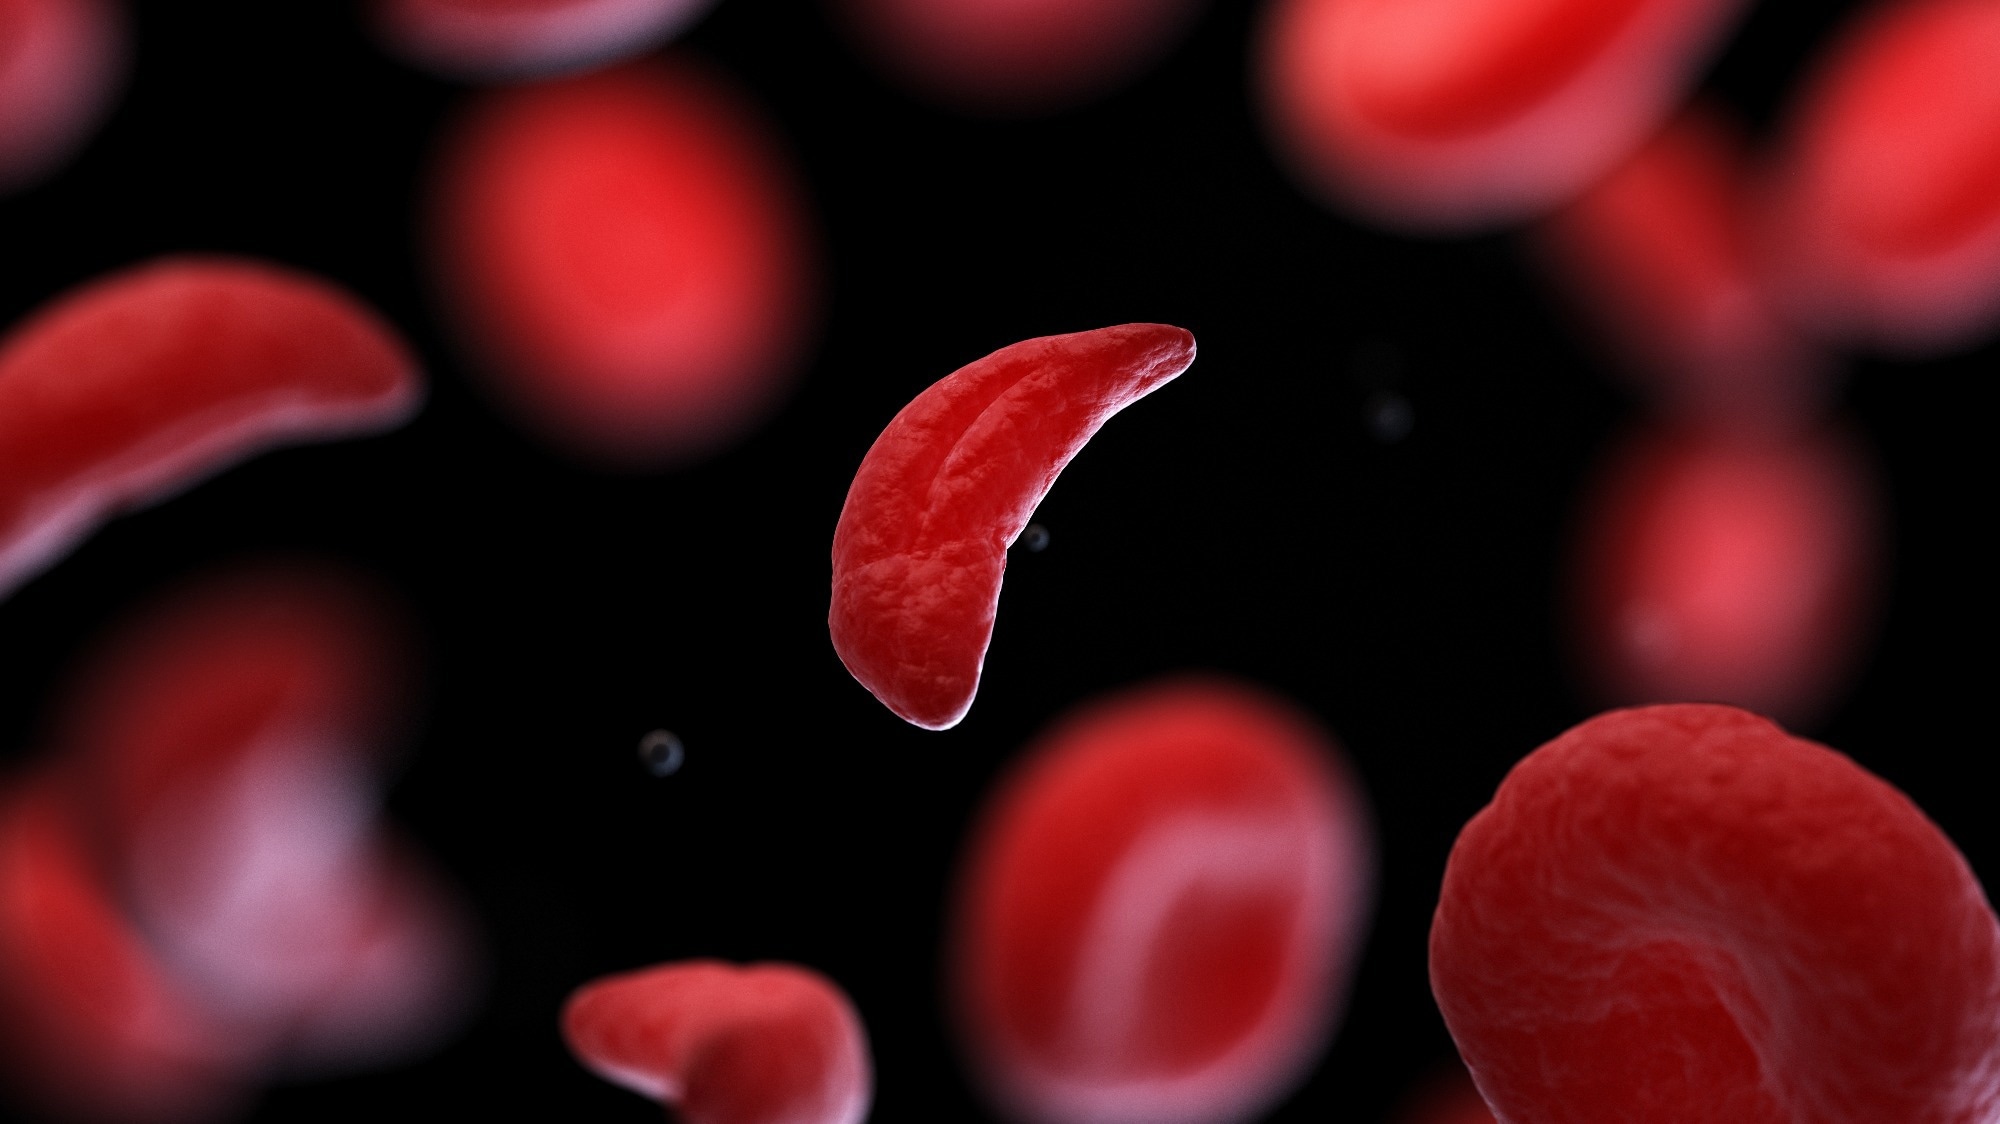 Study: Sickle Cell Disease Update: New Treatments and Challenging Nutritional Interventions. Image Credit: SciePro/Shutterstock.com